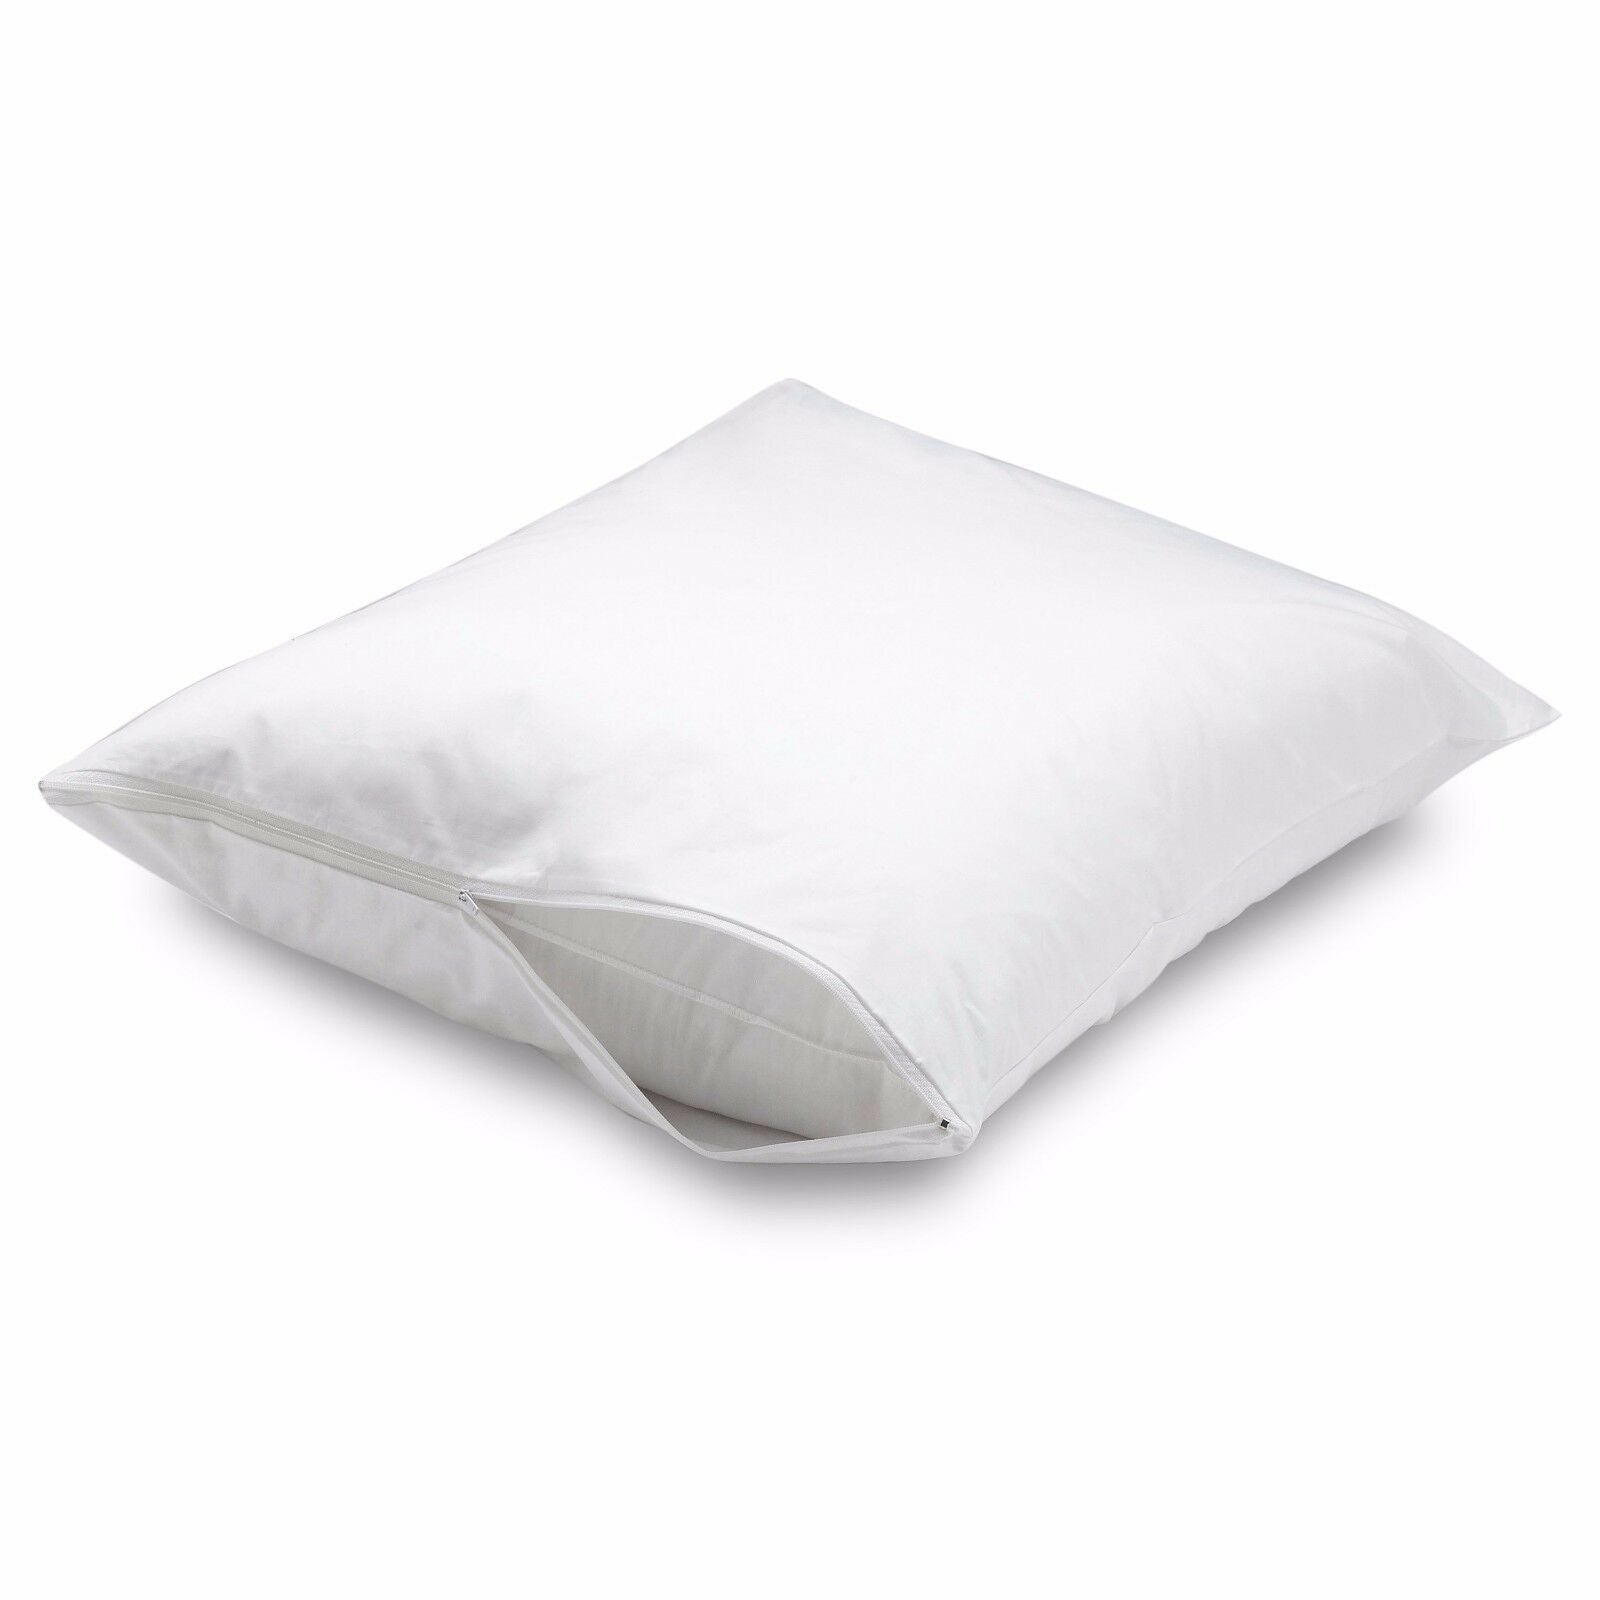 Zippered Pillow Cover Pillow cases Allergy and Bed Bug Control Breathable Pillow Protector